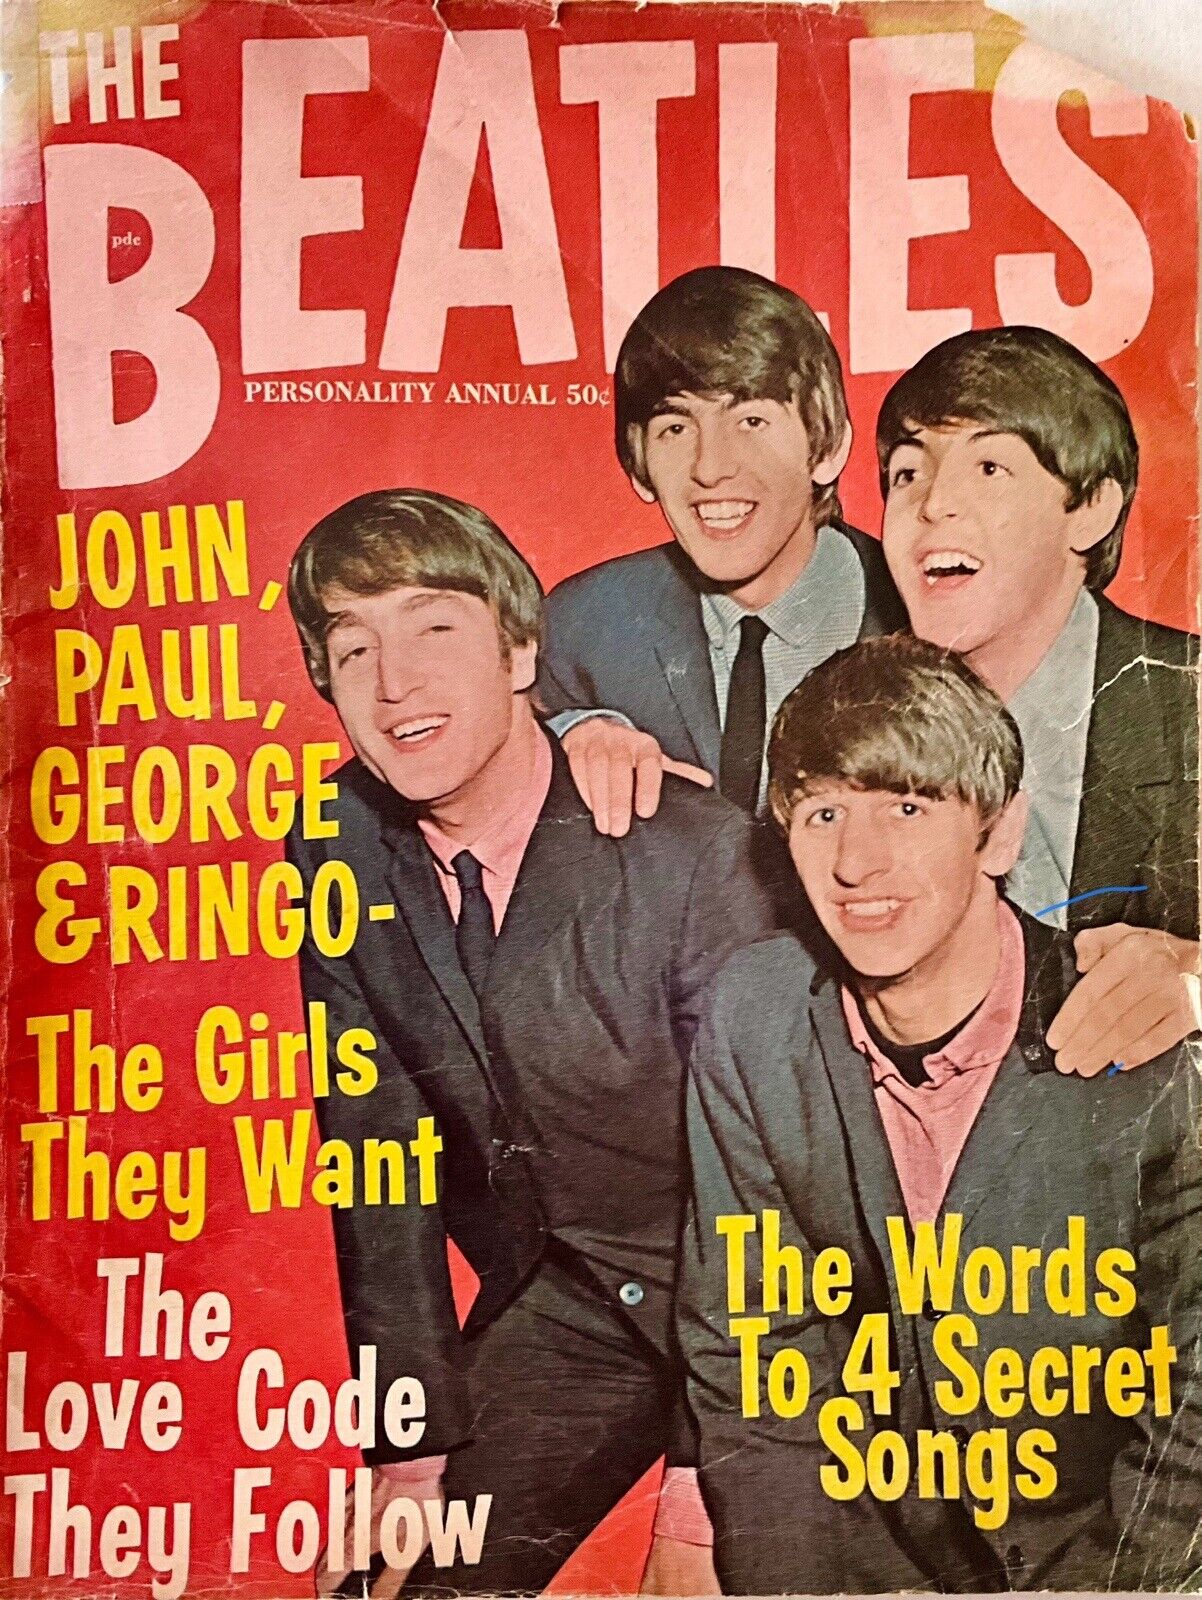 THE BEATLES, Personality Annual, Vol. 1 No. 1, 1994 Vintage Magazine